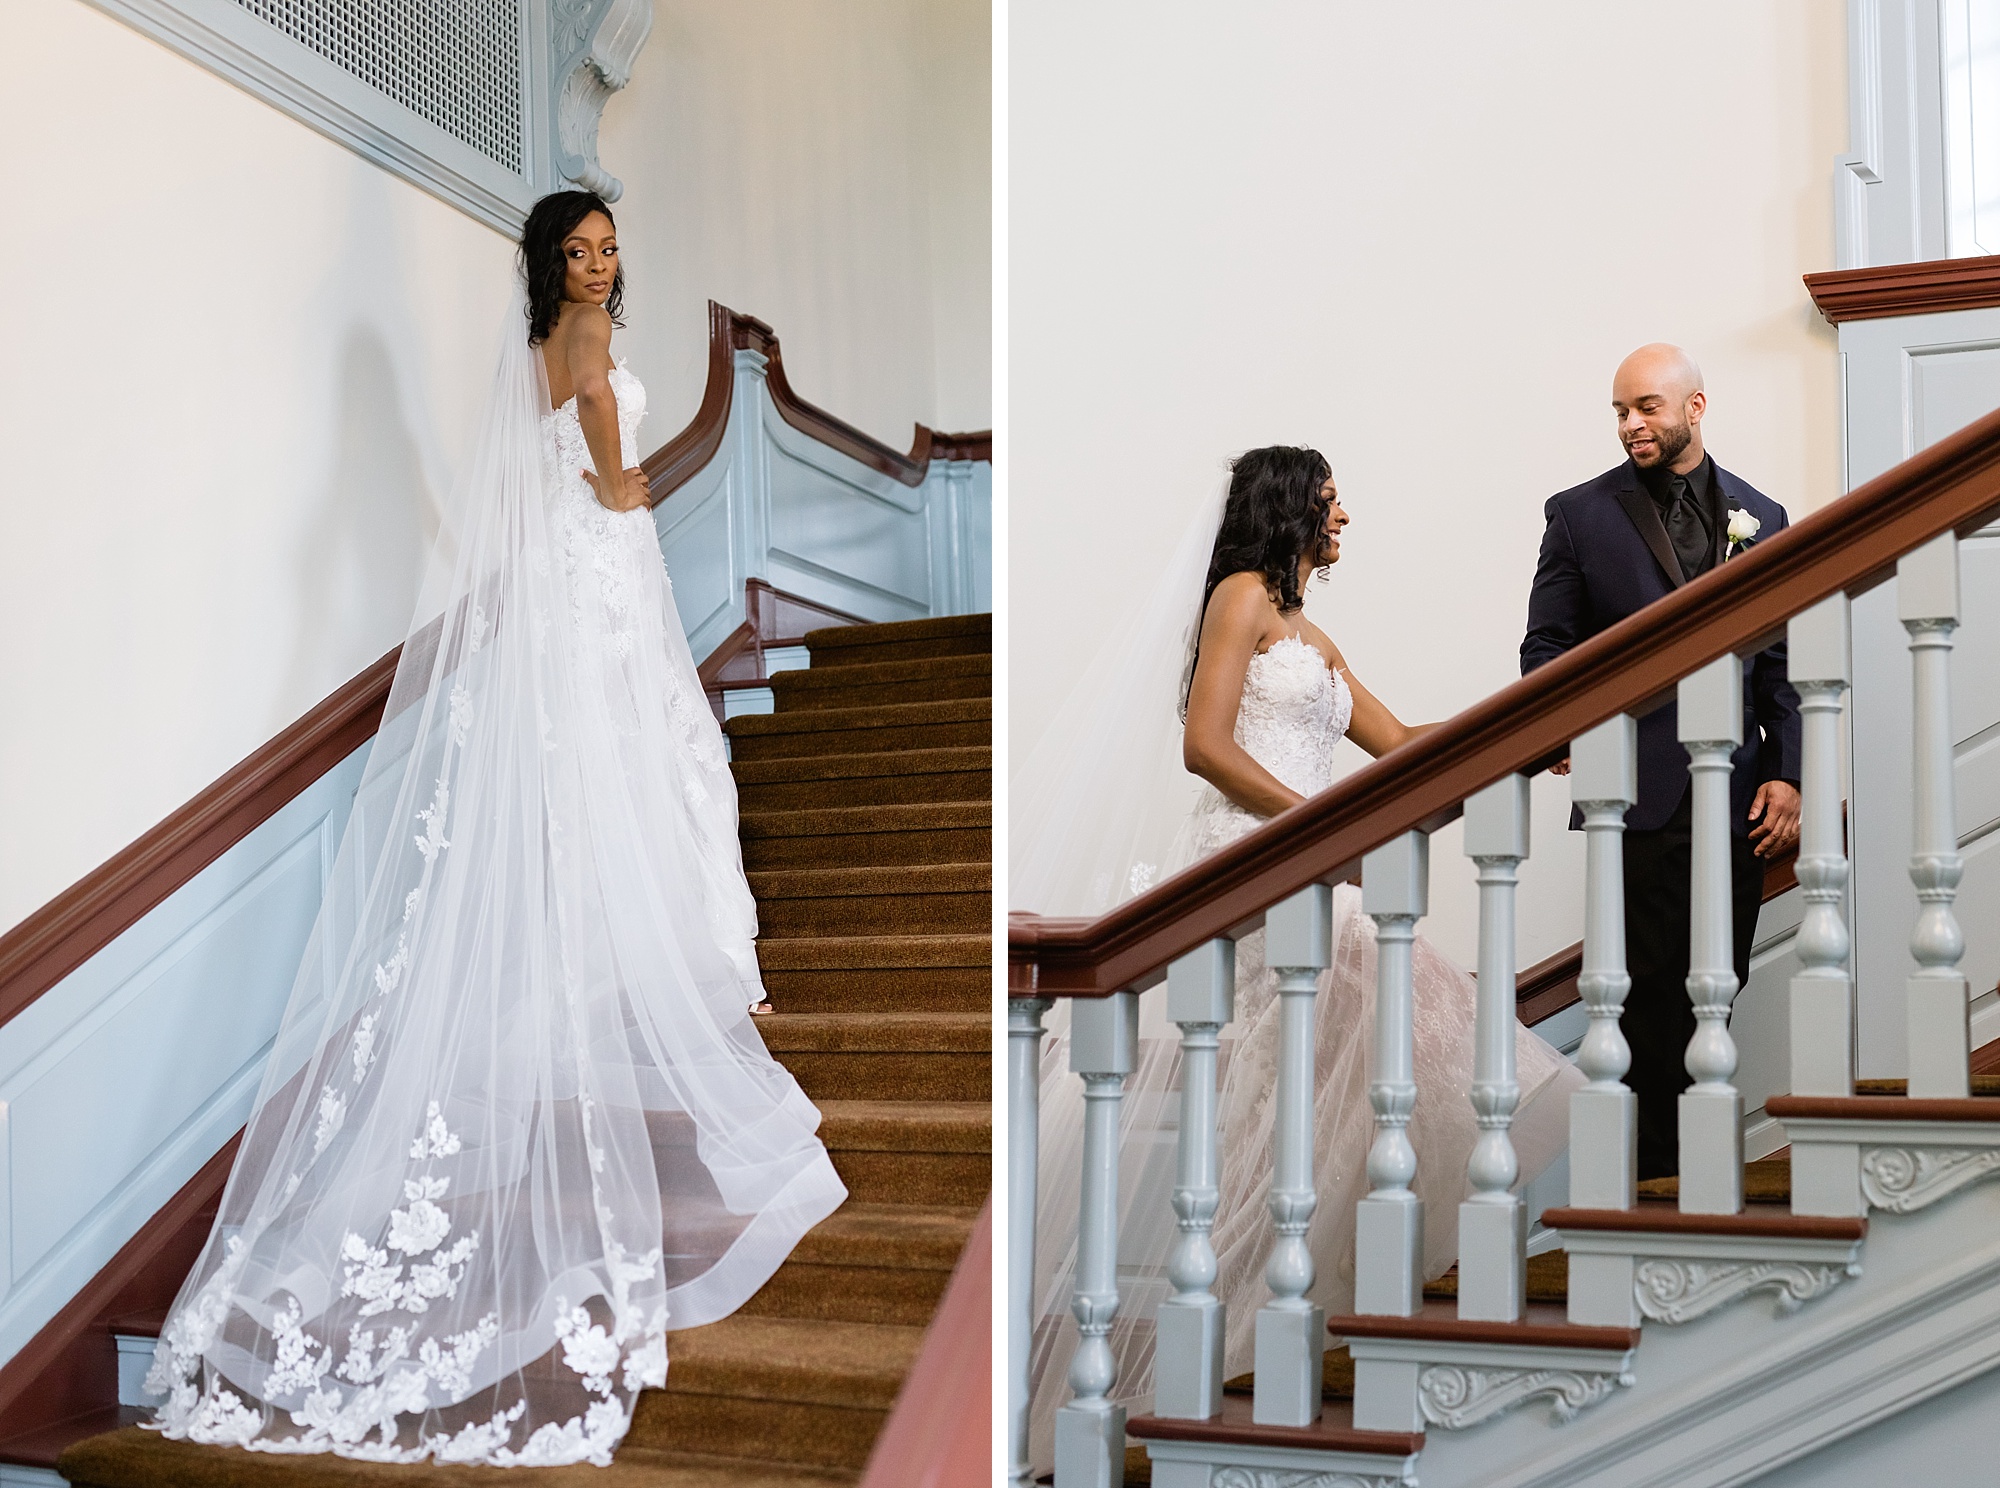 An elegant springtime Lovett Hall wedding at The Henry Ford filled with white and fuchsia orchids, roses, and touches of Greece by Breanne Rochelle Photography. 